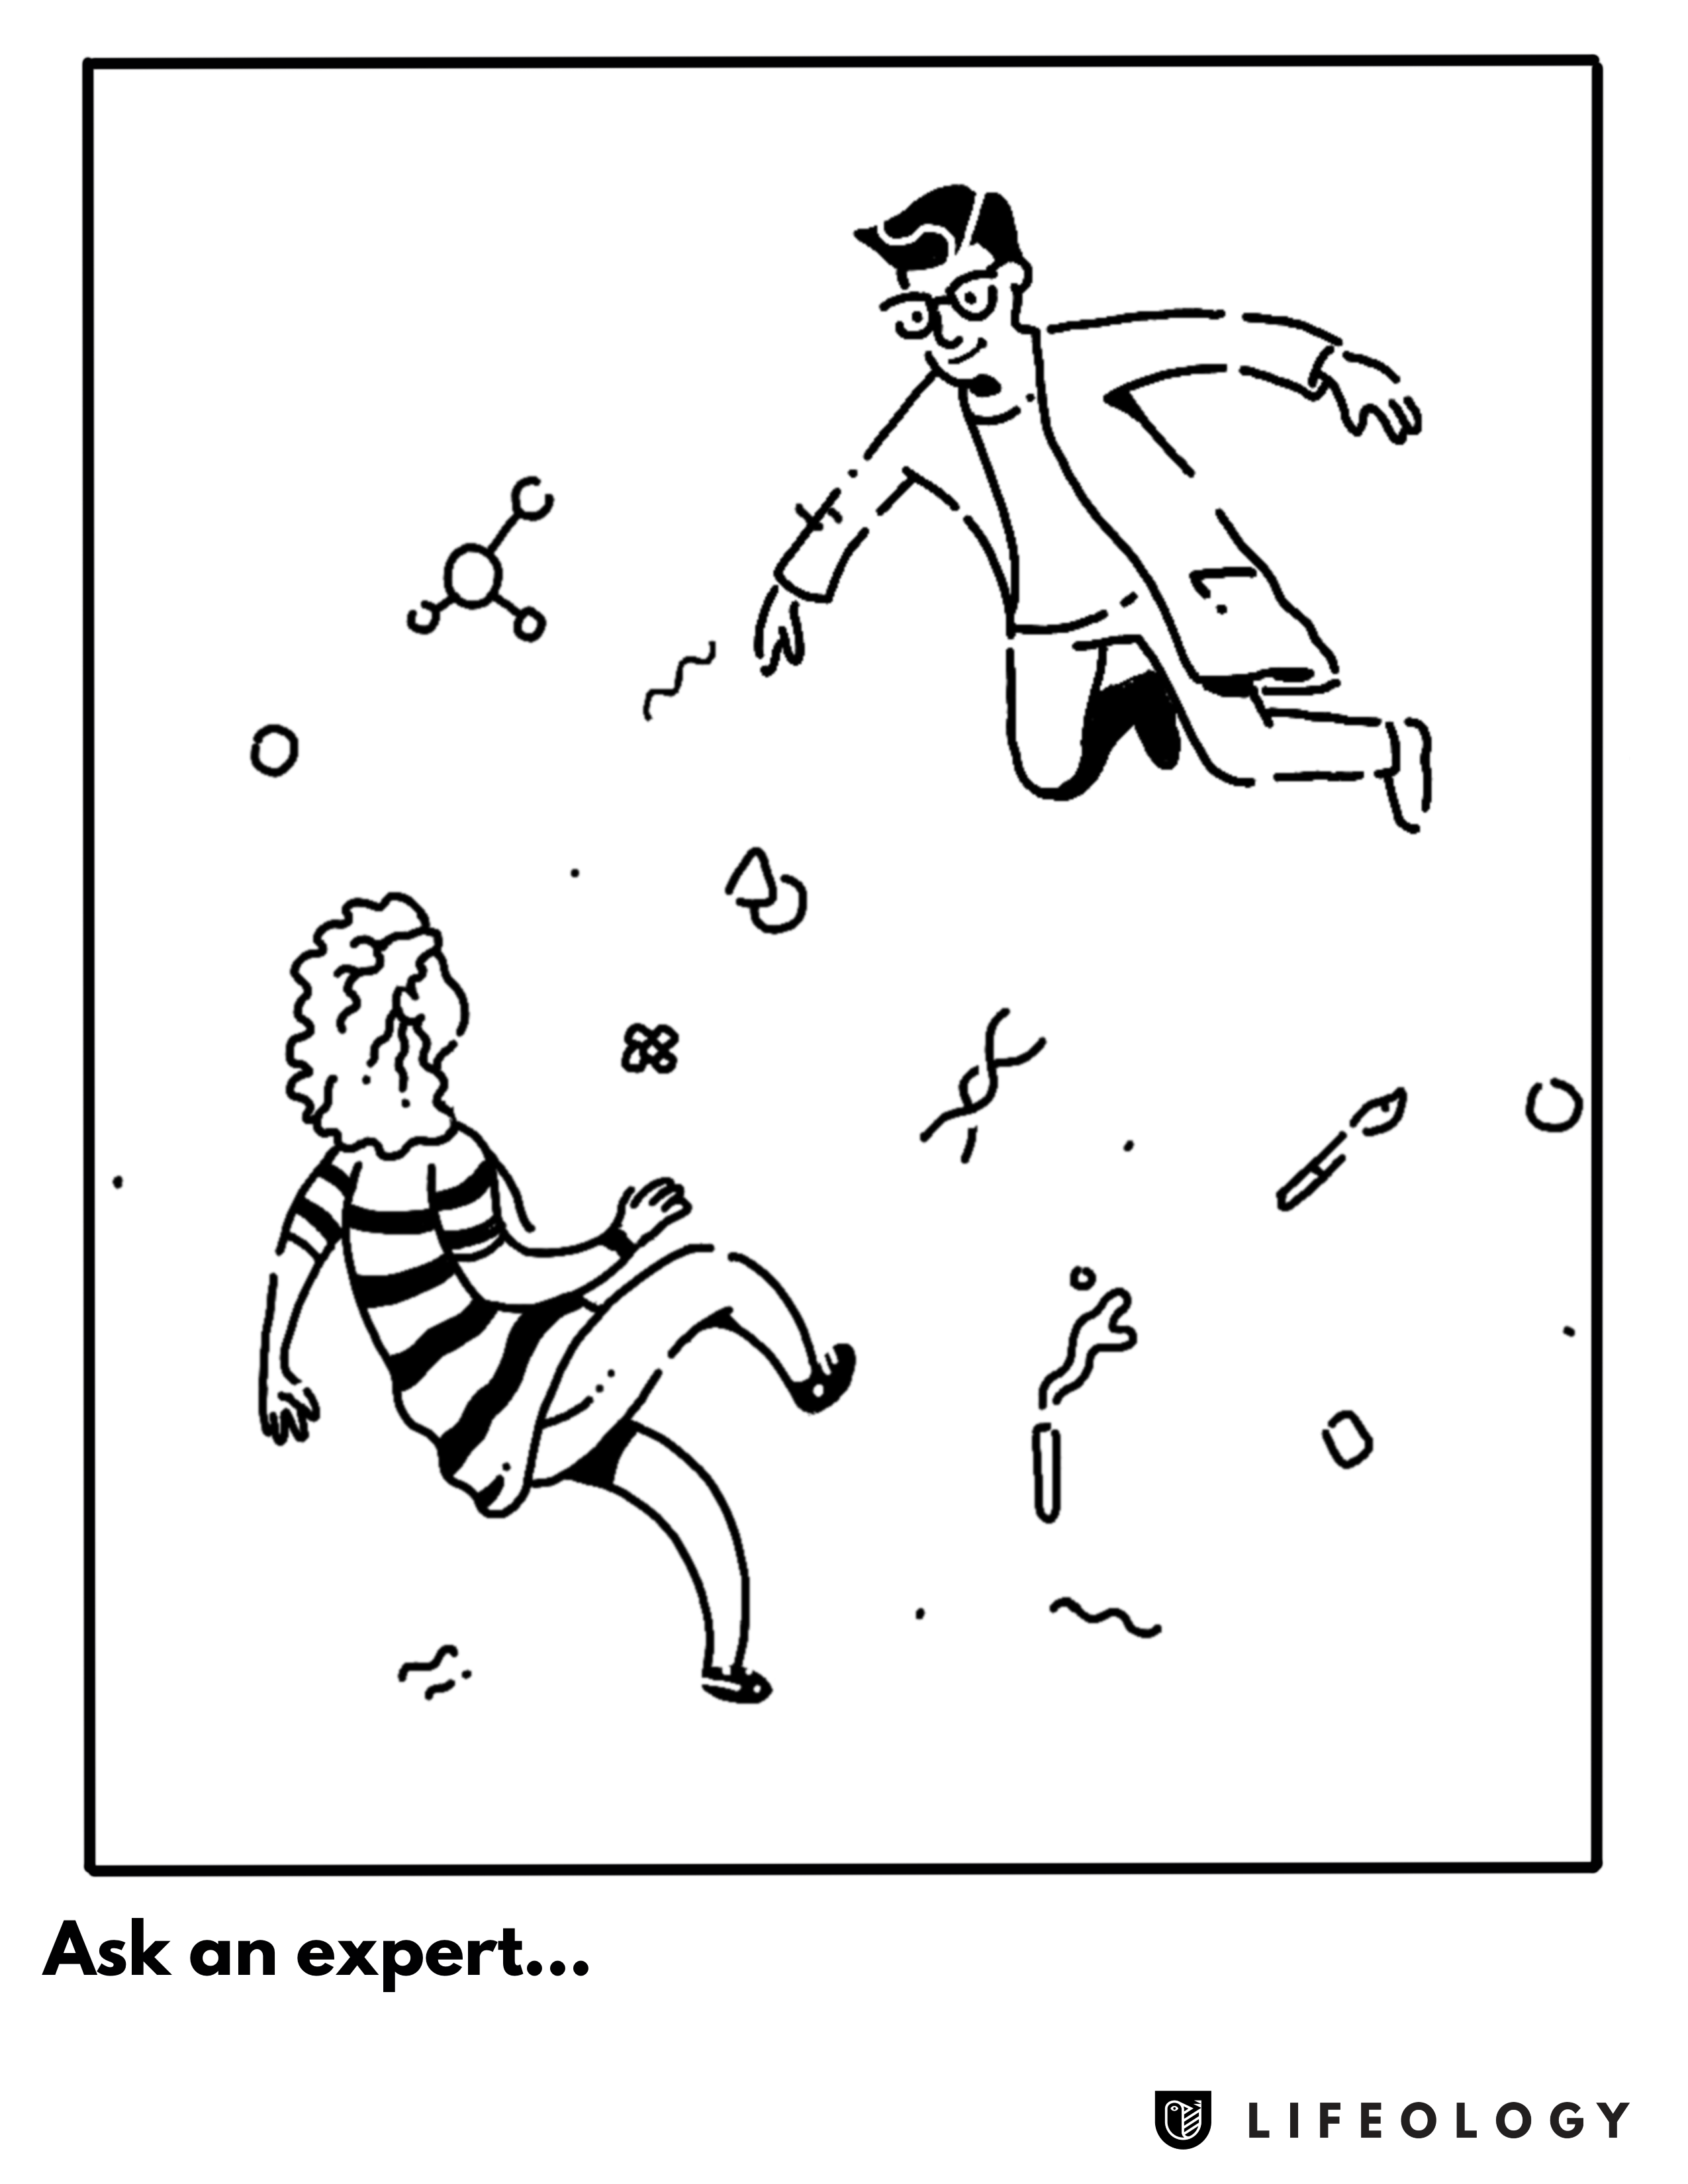 A coloring sheet of a science expert and girl floating.